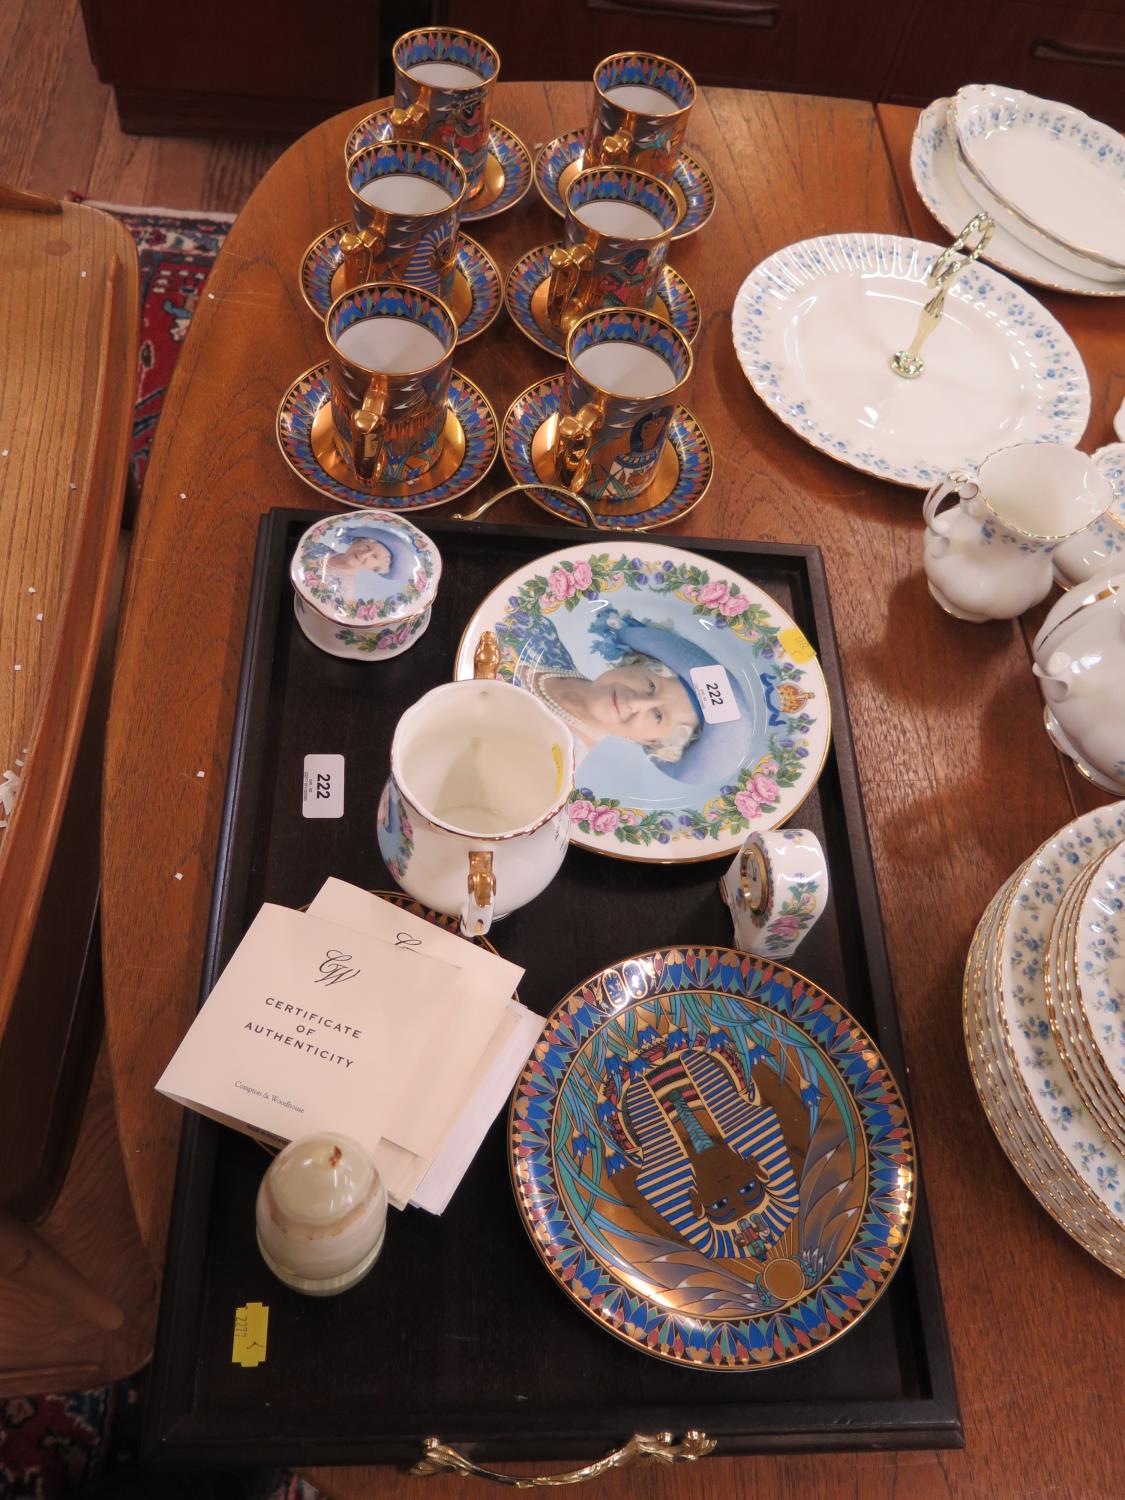 A set of six Compton & Woodhouse cups and saucers from the 'Wonders of the Nile' series, with